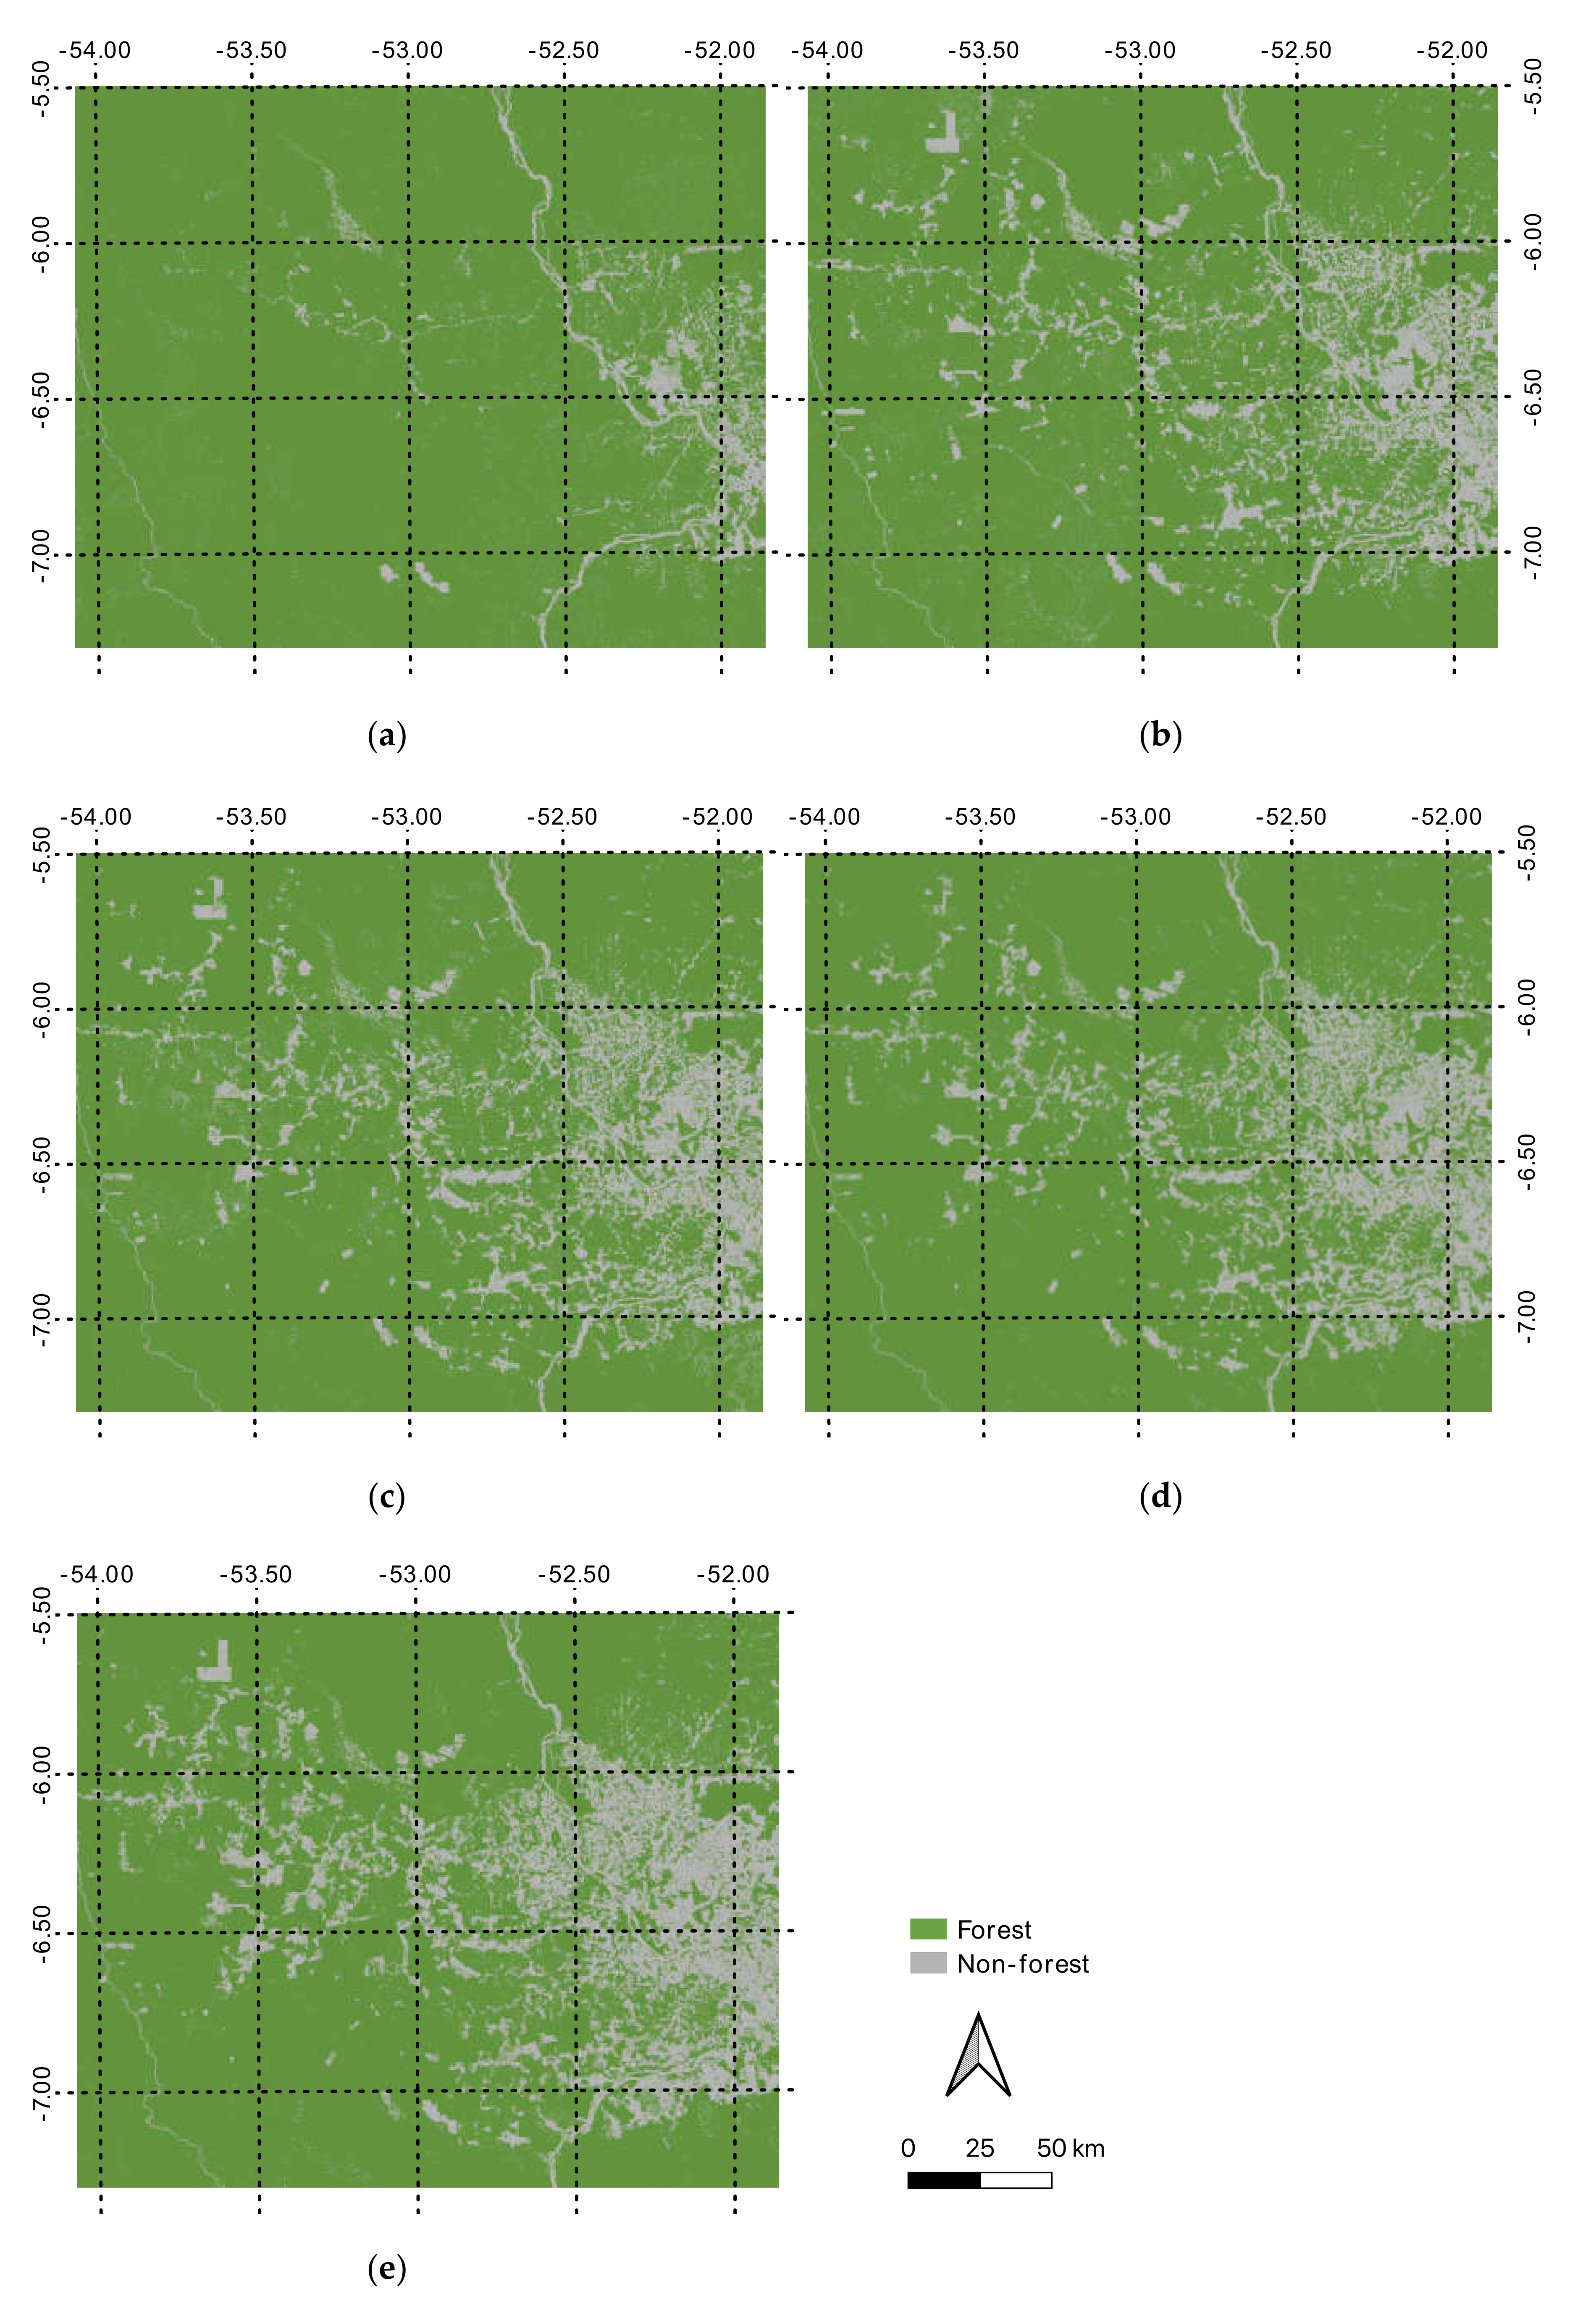 IJGI | Free Full-Text | Monitoring Forest Change in the Amazon Using  Multi-Temporal Remote Sensing Data and Machine Learning Classification on  Google Earth Engine